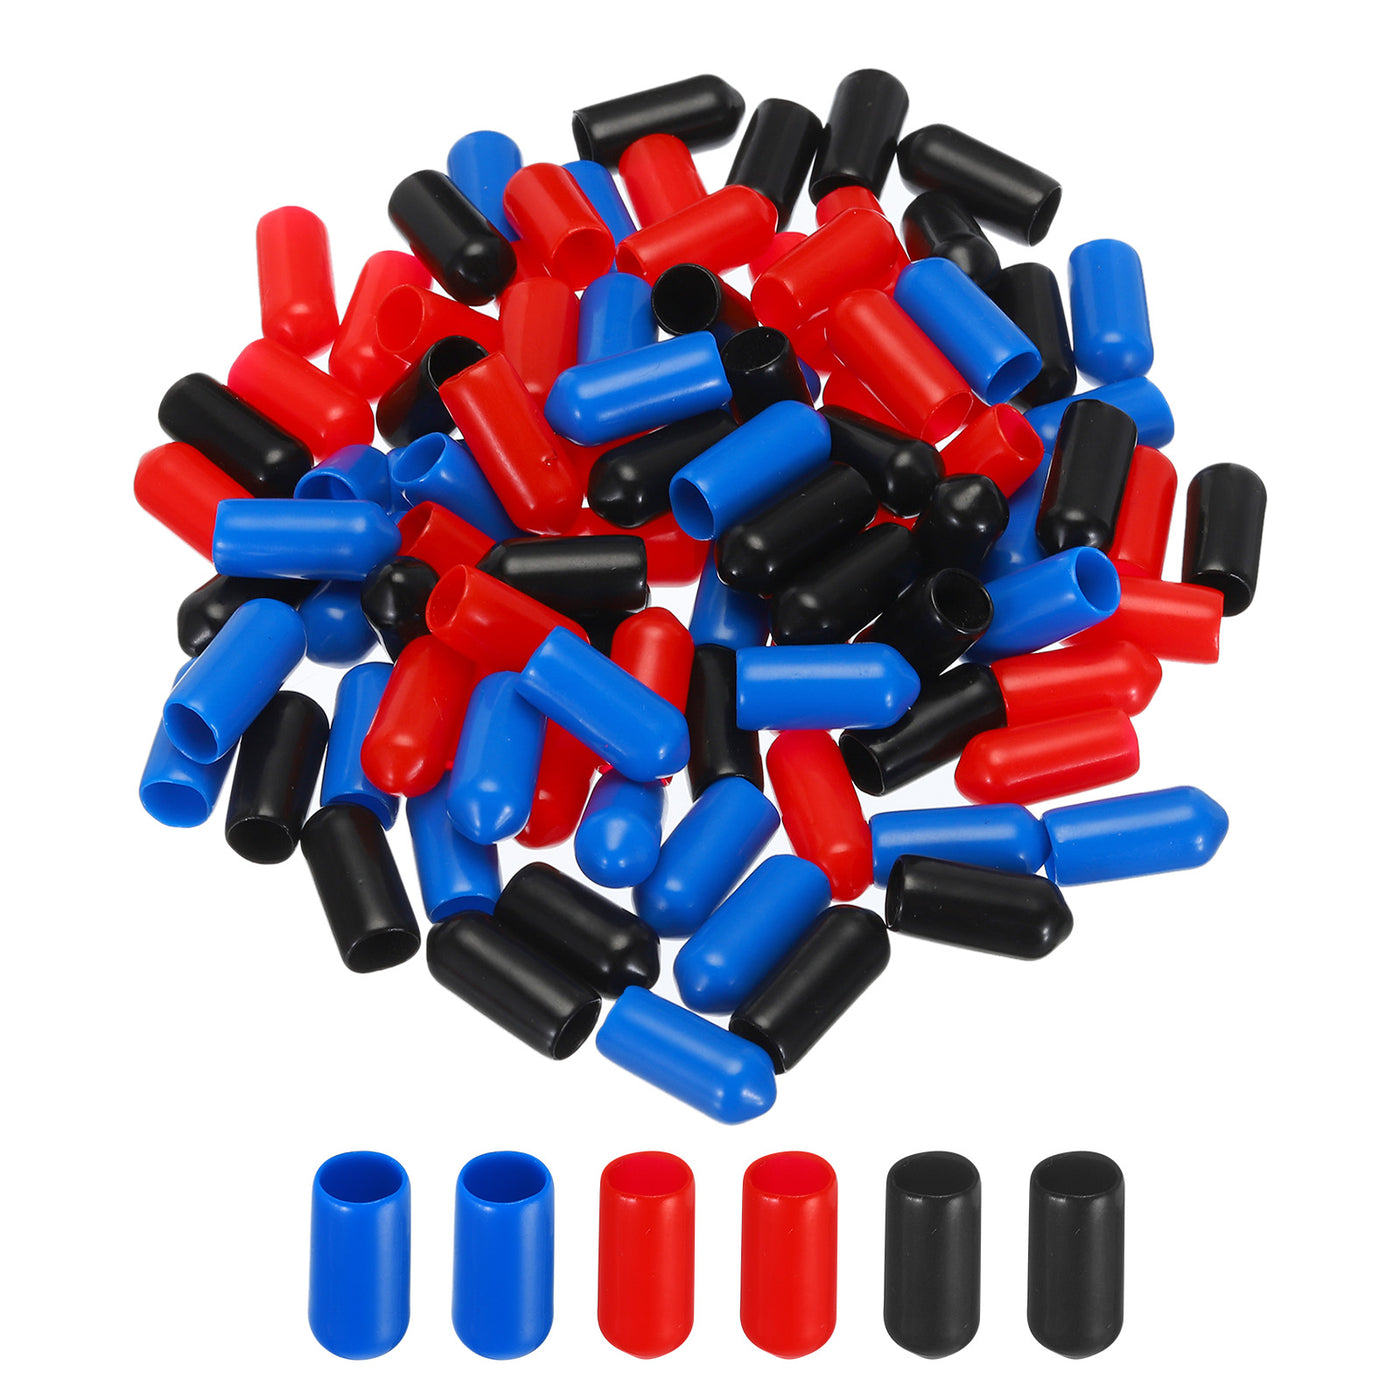 uxcell Uxcell 180pcs Rubber End Caps 6.5mm(1/4") ID Vinyl PVC Round Tube Bolt Cap Cover Screw Thread Protectors, Black Red Blue